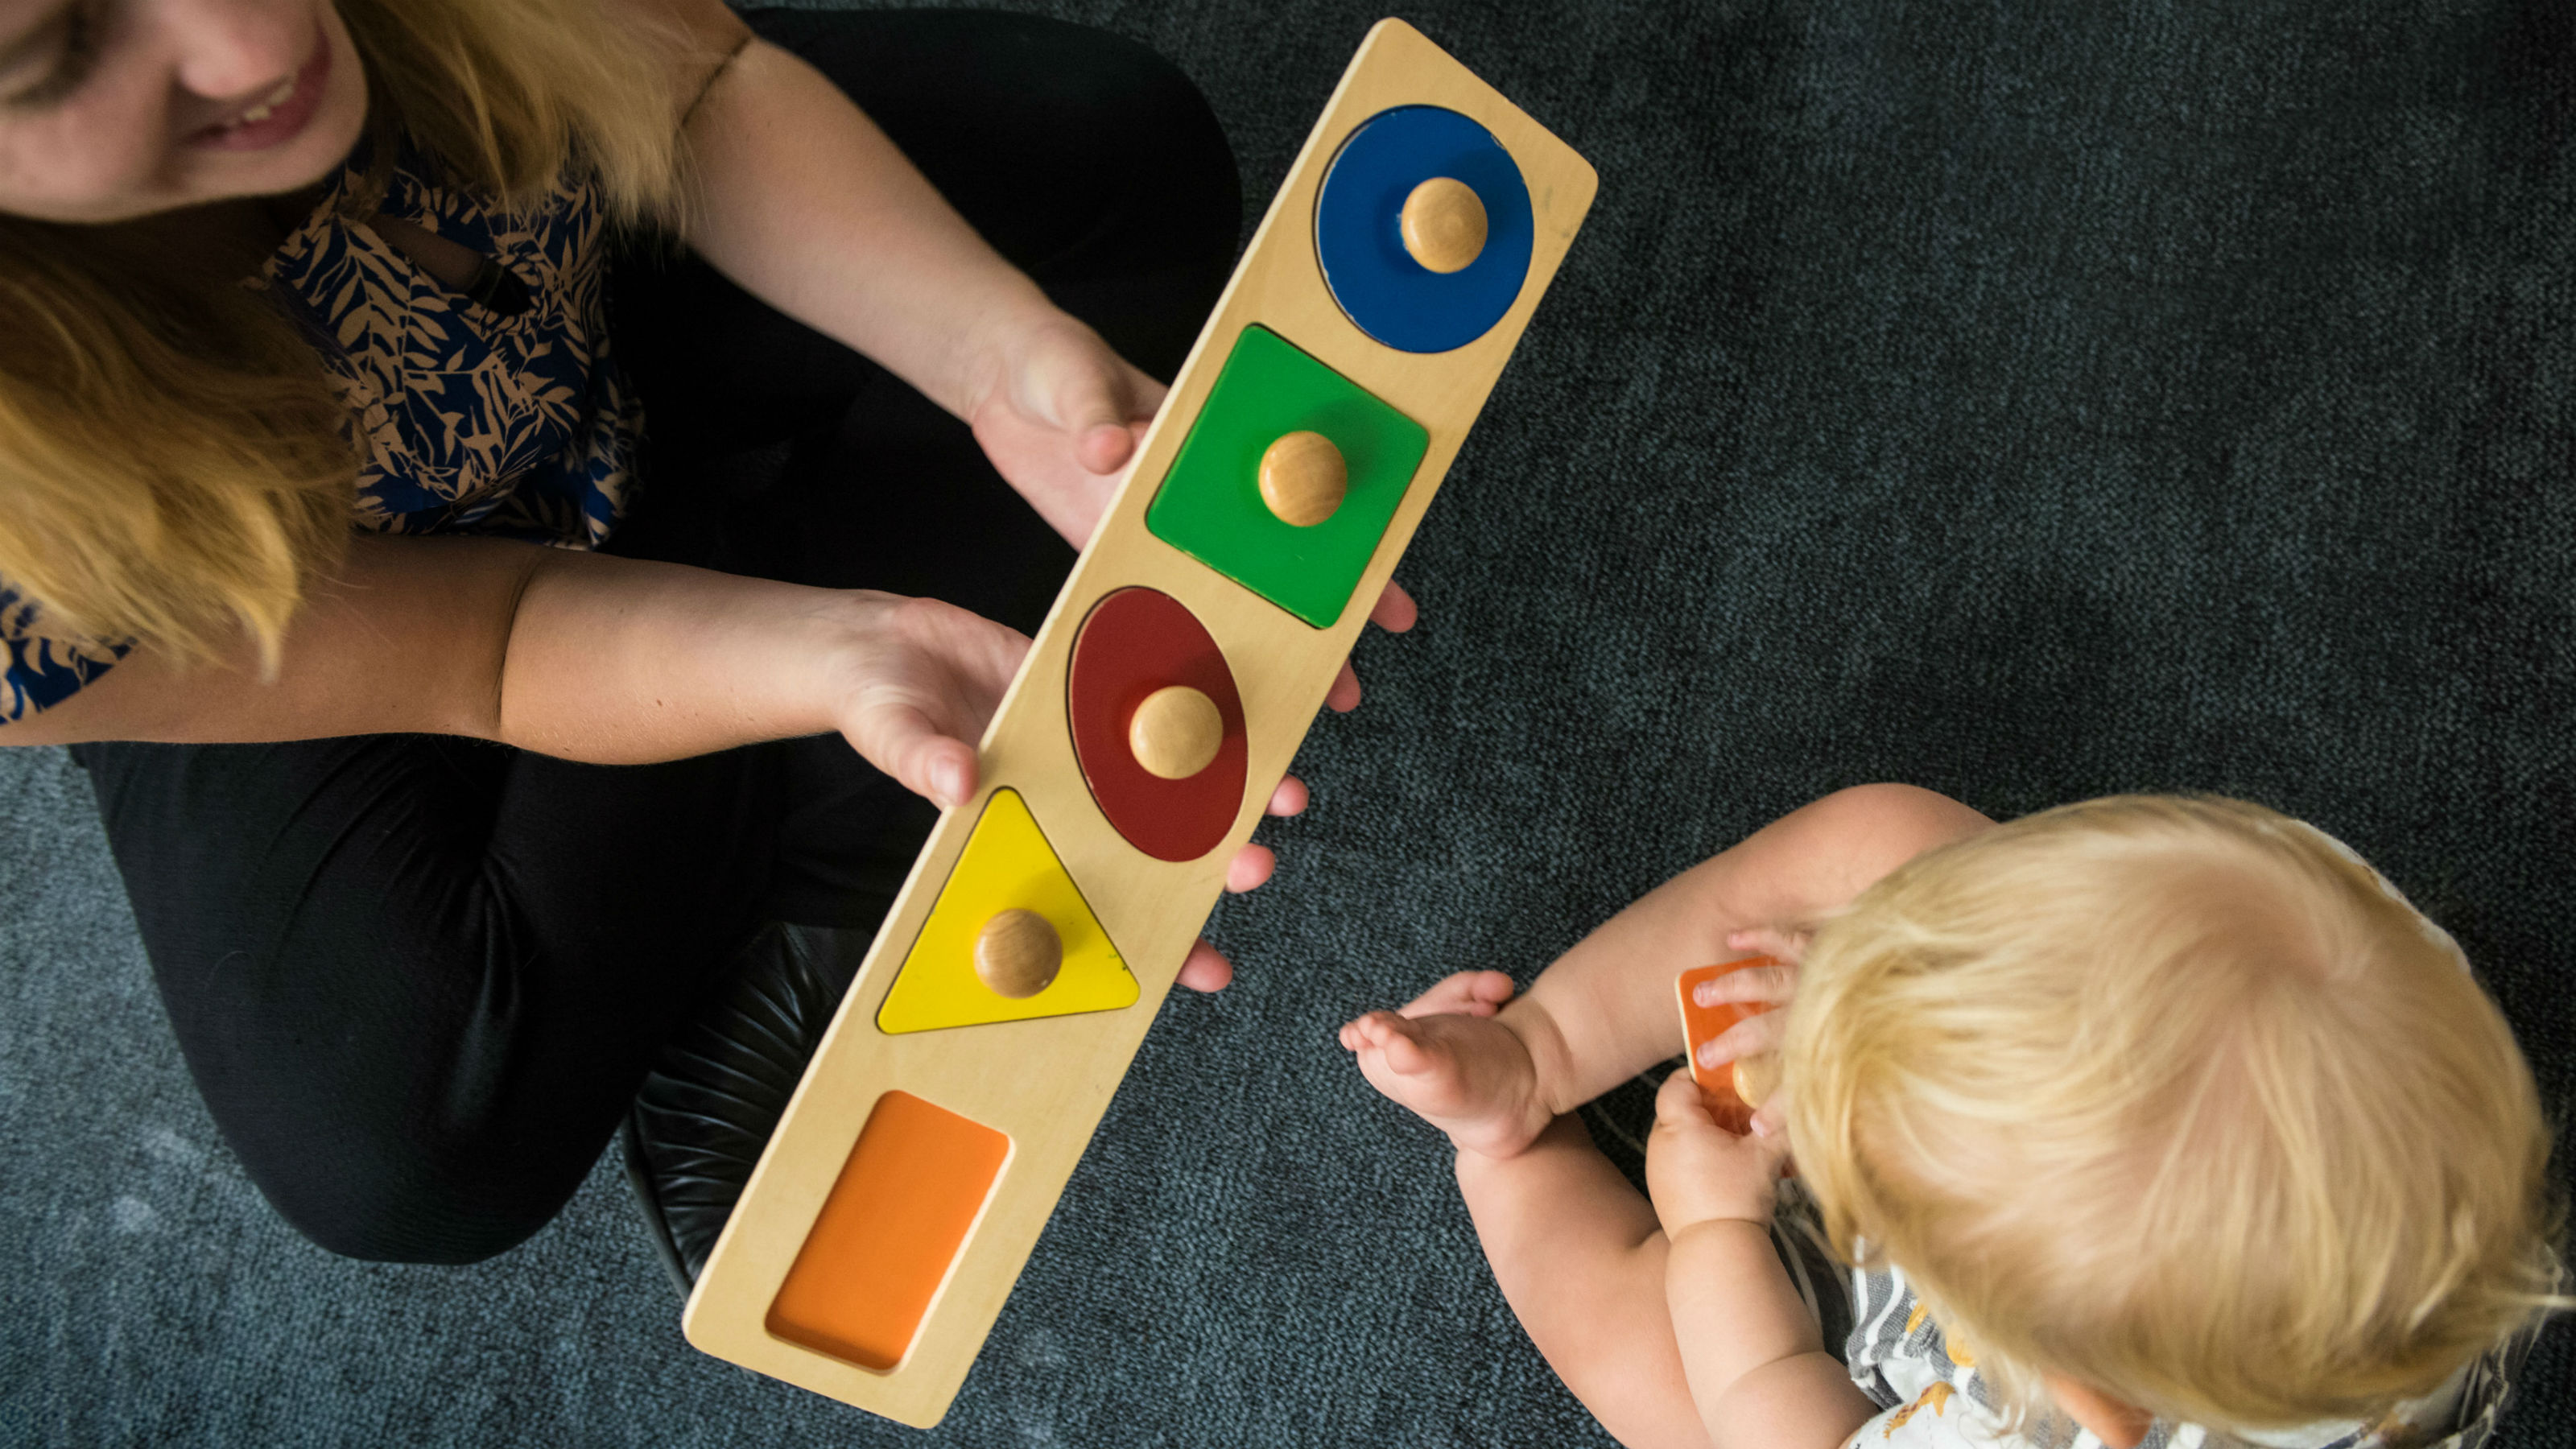 A view from above, a woman holds a wooden puzzle of four shapes, a young child holds an orange rectangular piece in his hand.